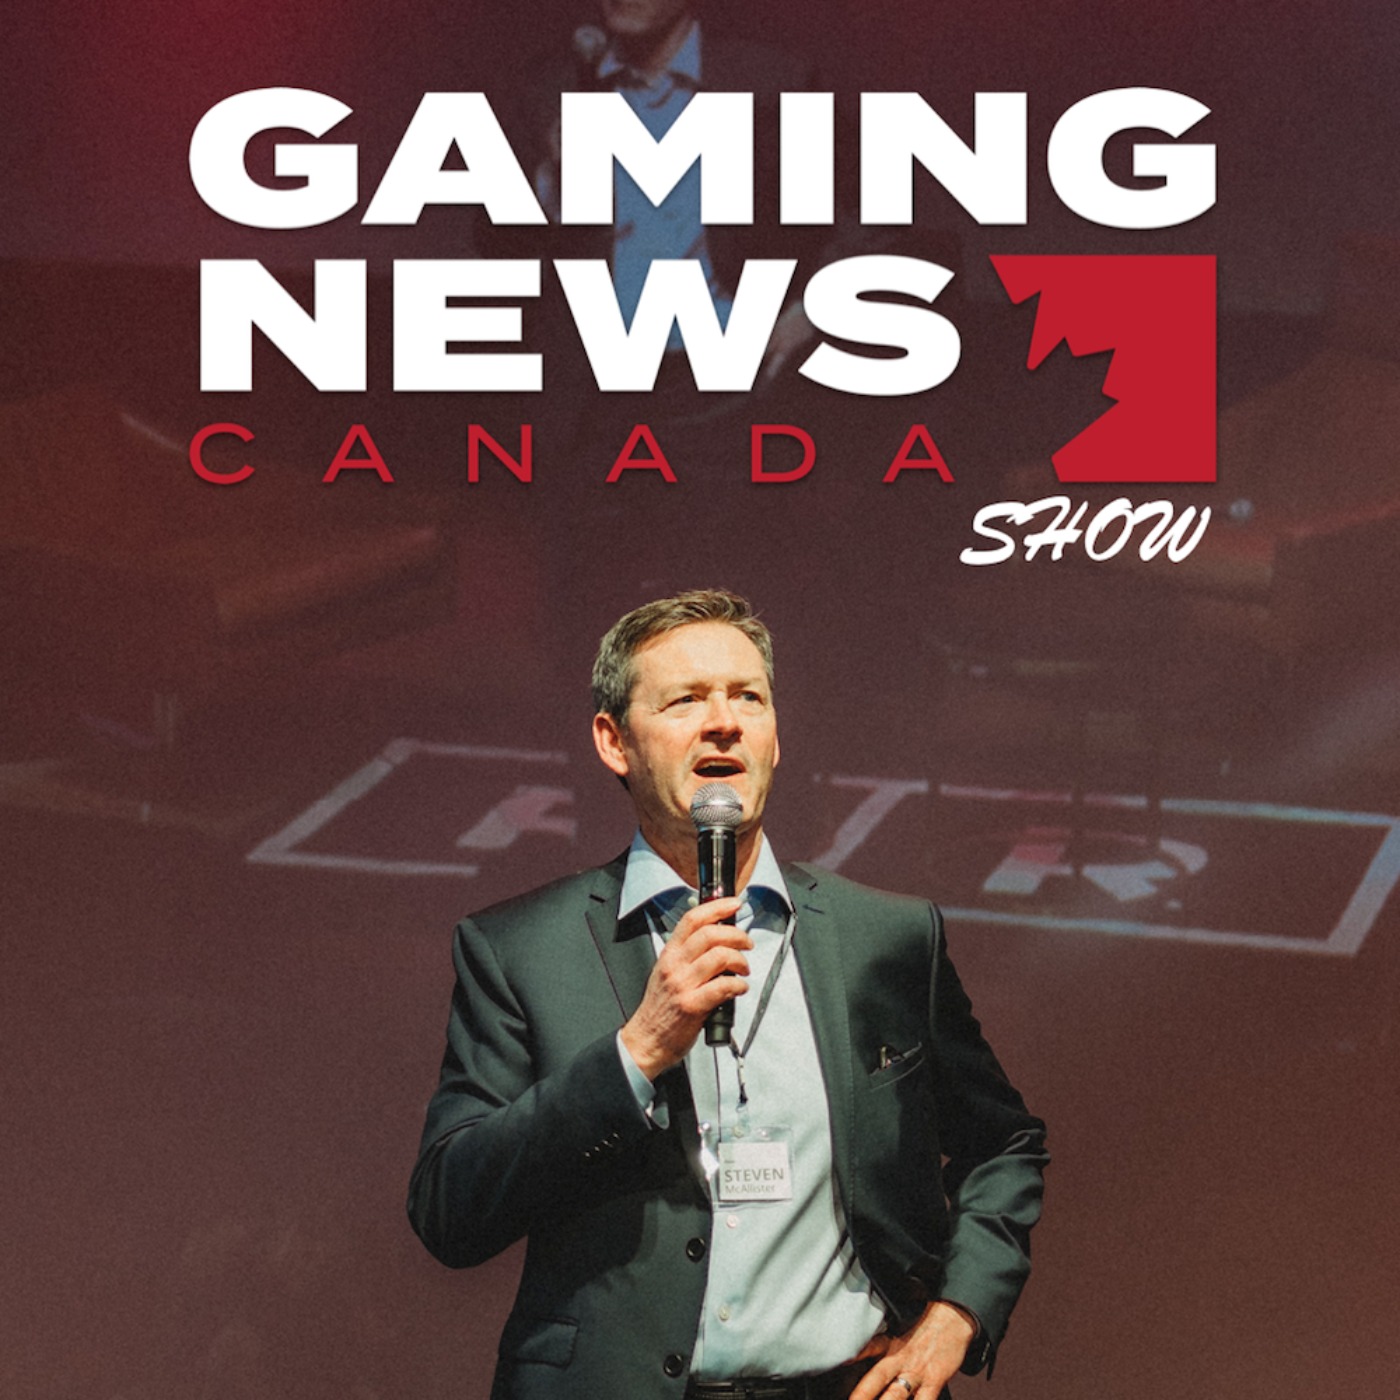 AGCO to ban athletes in Ontario's igaming advertising to protect minors – European  Gaming Industry News